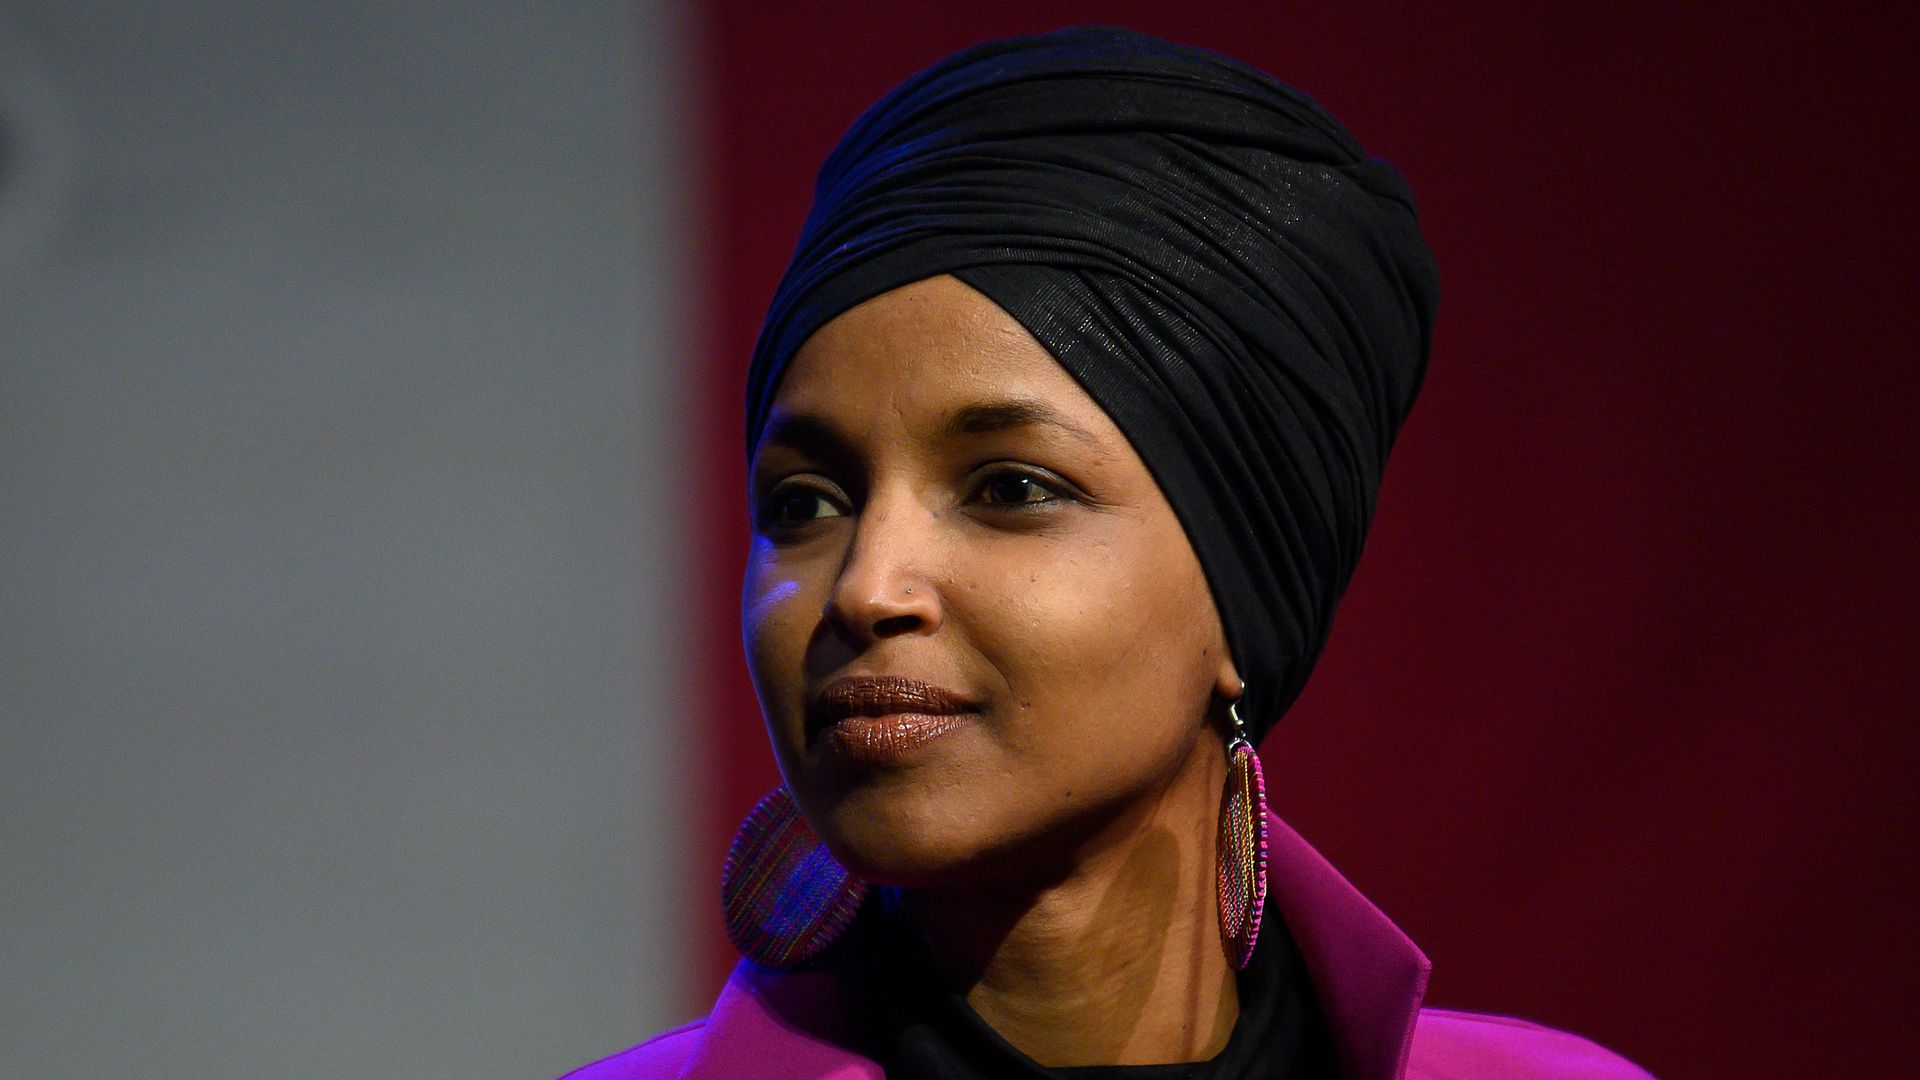 Congresswoman Ilhan Omar speaks to supporters of Democratic presidential candidate Senator Bernie Sanders at a campaign event in Clive, Iowa, on January 31